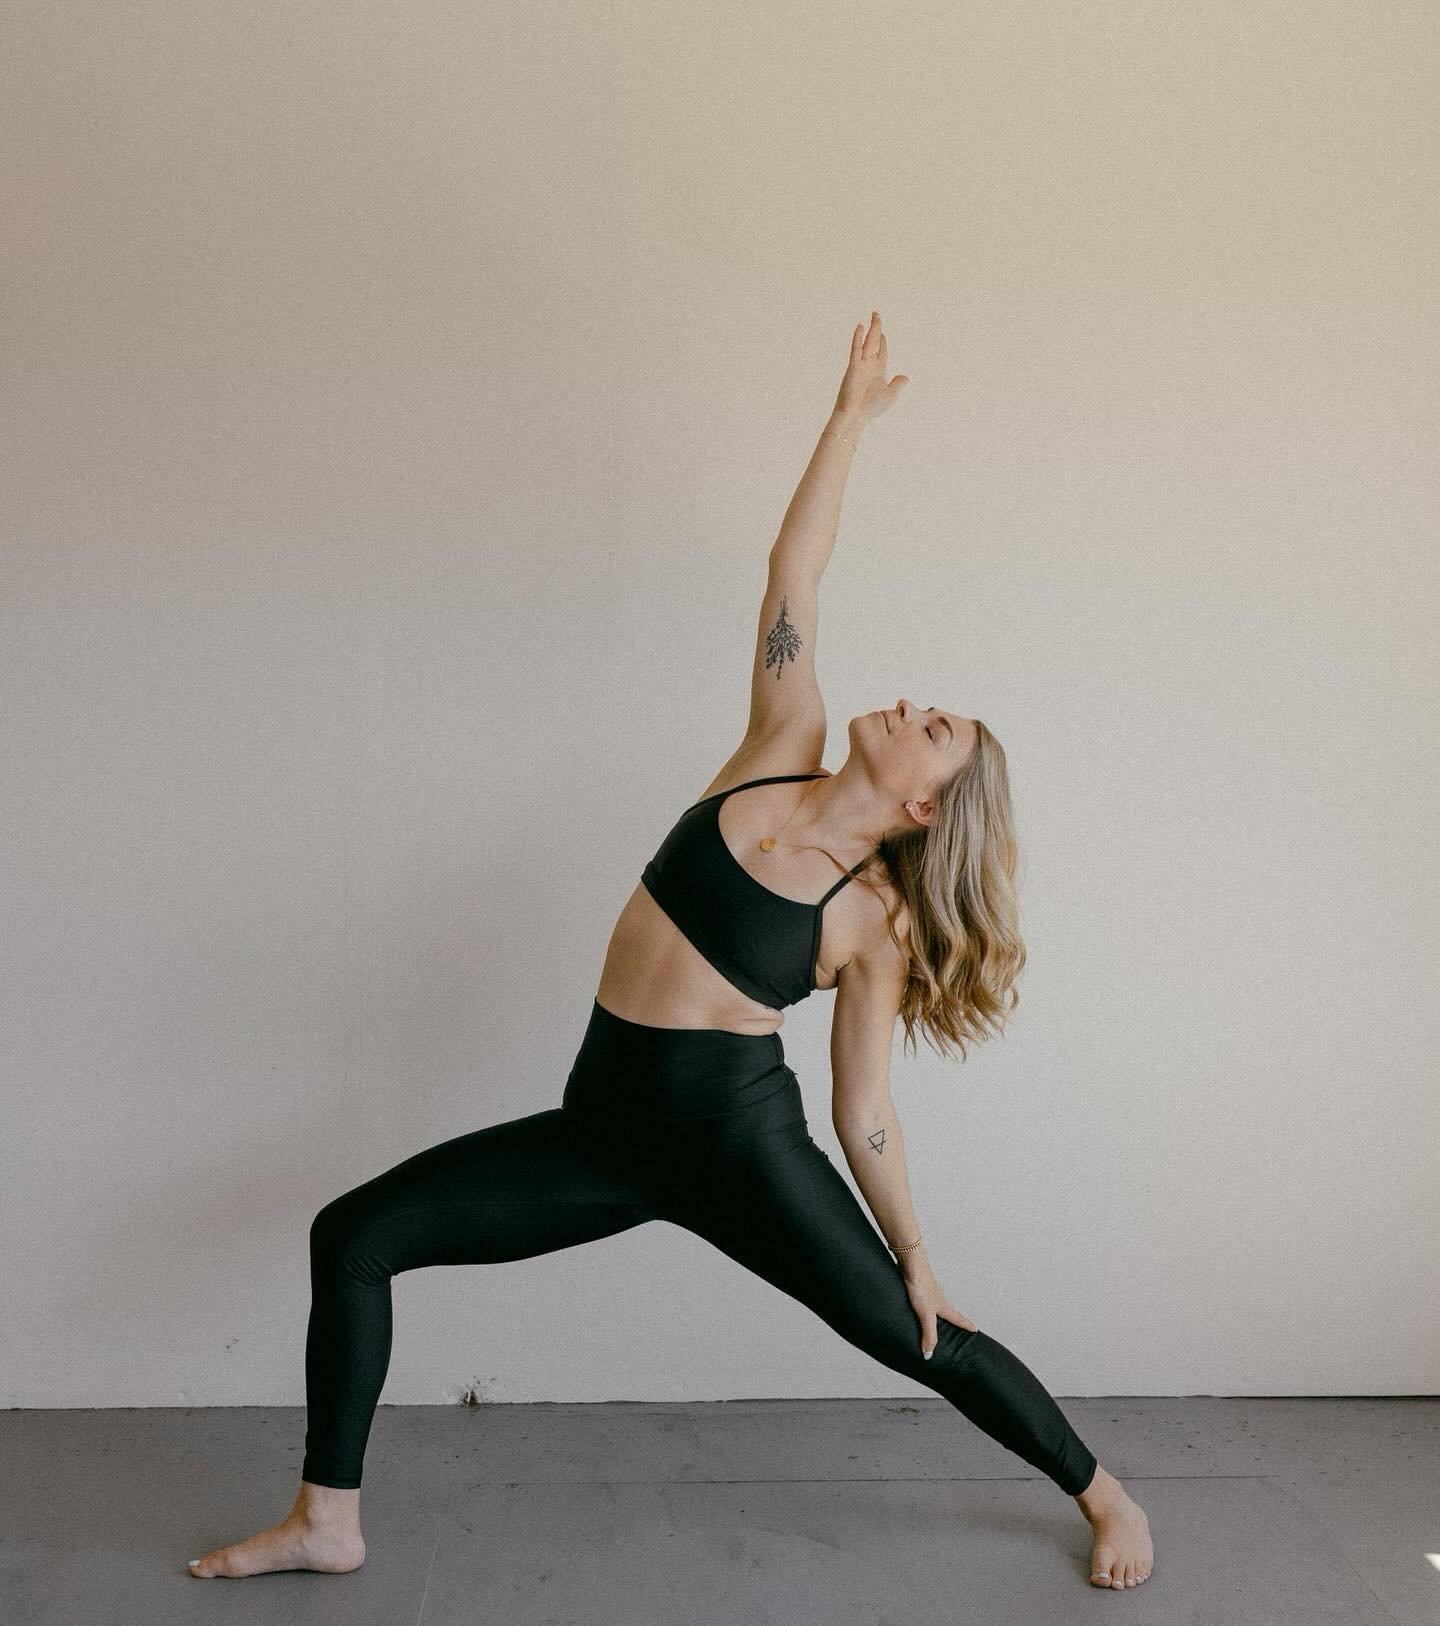 one thing that they don&rsquo;t tell you about becoming a yoga teacher is that your own practice may suffer because of it ⏳

as a yoga teacher who works a full time 9-5, &amp; spends a lot of my free time teaching yoga, i have found that i have less 